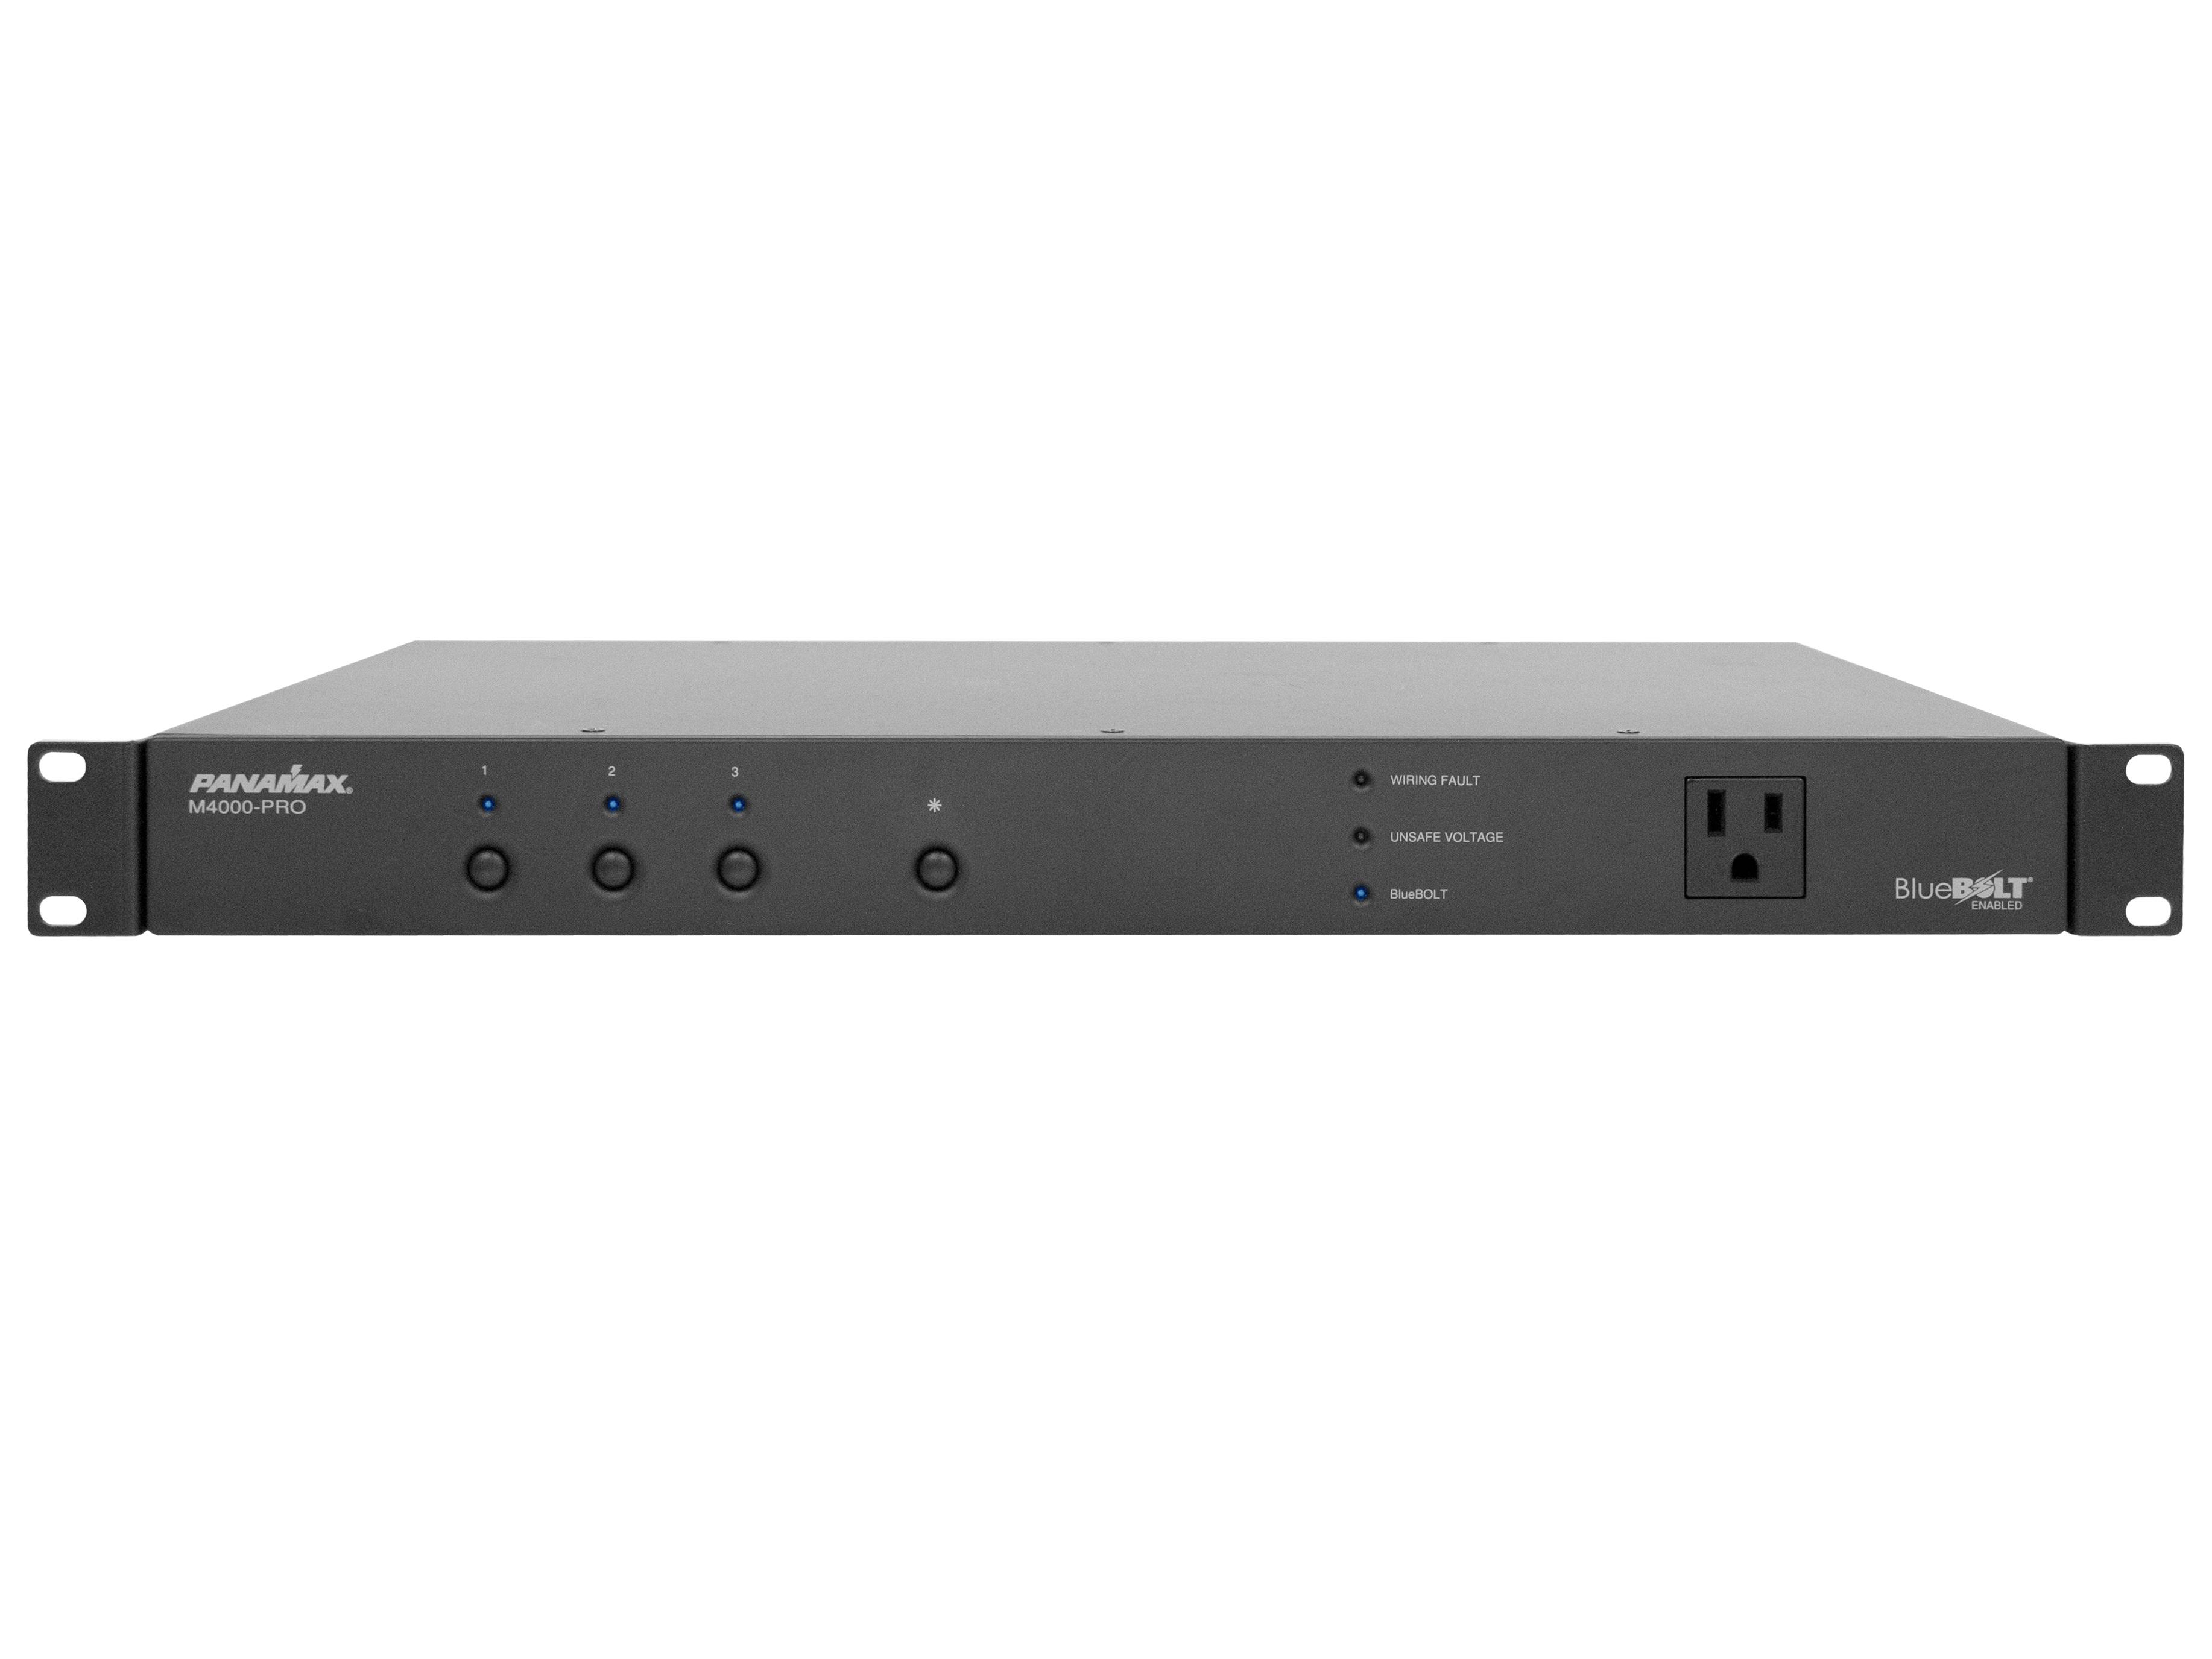 M4000-PRO 15A Power Conditioner/8 Outlets In 3 Controllable Banks by Panamax